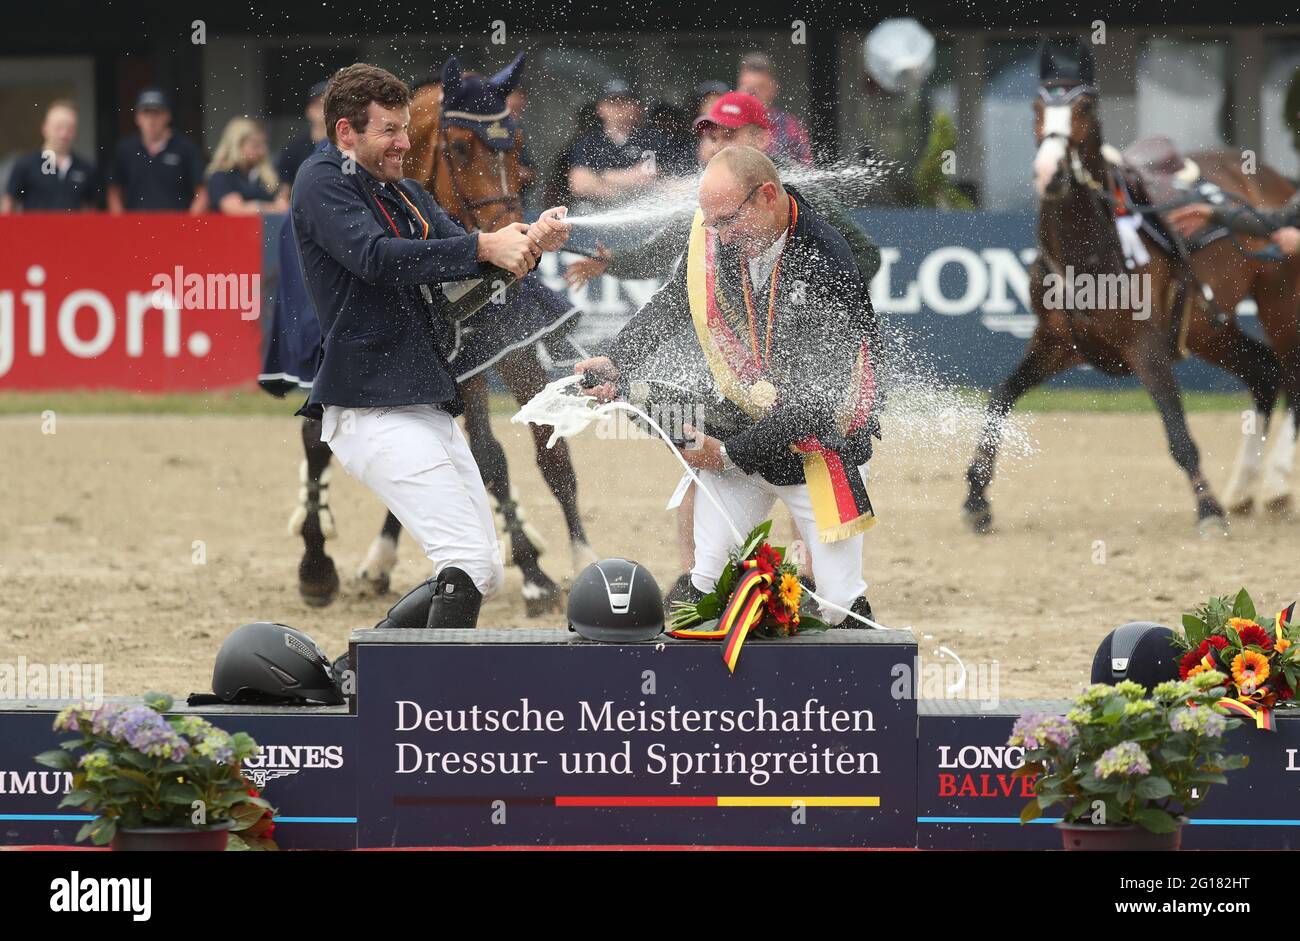 Balve, Germany. 05th June, 2021. Equestrian sport: German championship, show jumping. The show jumper Tobias Meyer (r) celebrates winning the German Show Jumping Championship with the runner-up Maximilian Weishaupt (l). Credit: Friso Gentsch/dpa/Alamy Live News Stock Photo